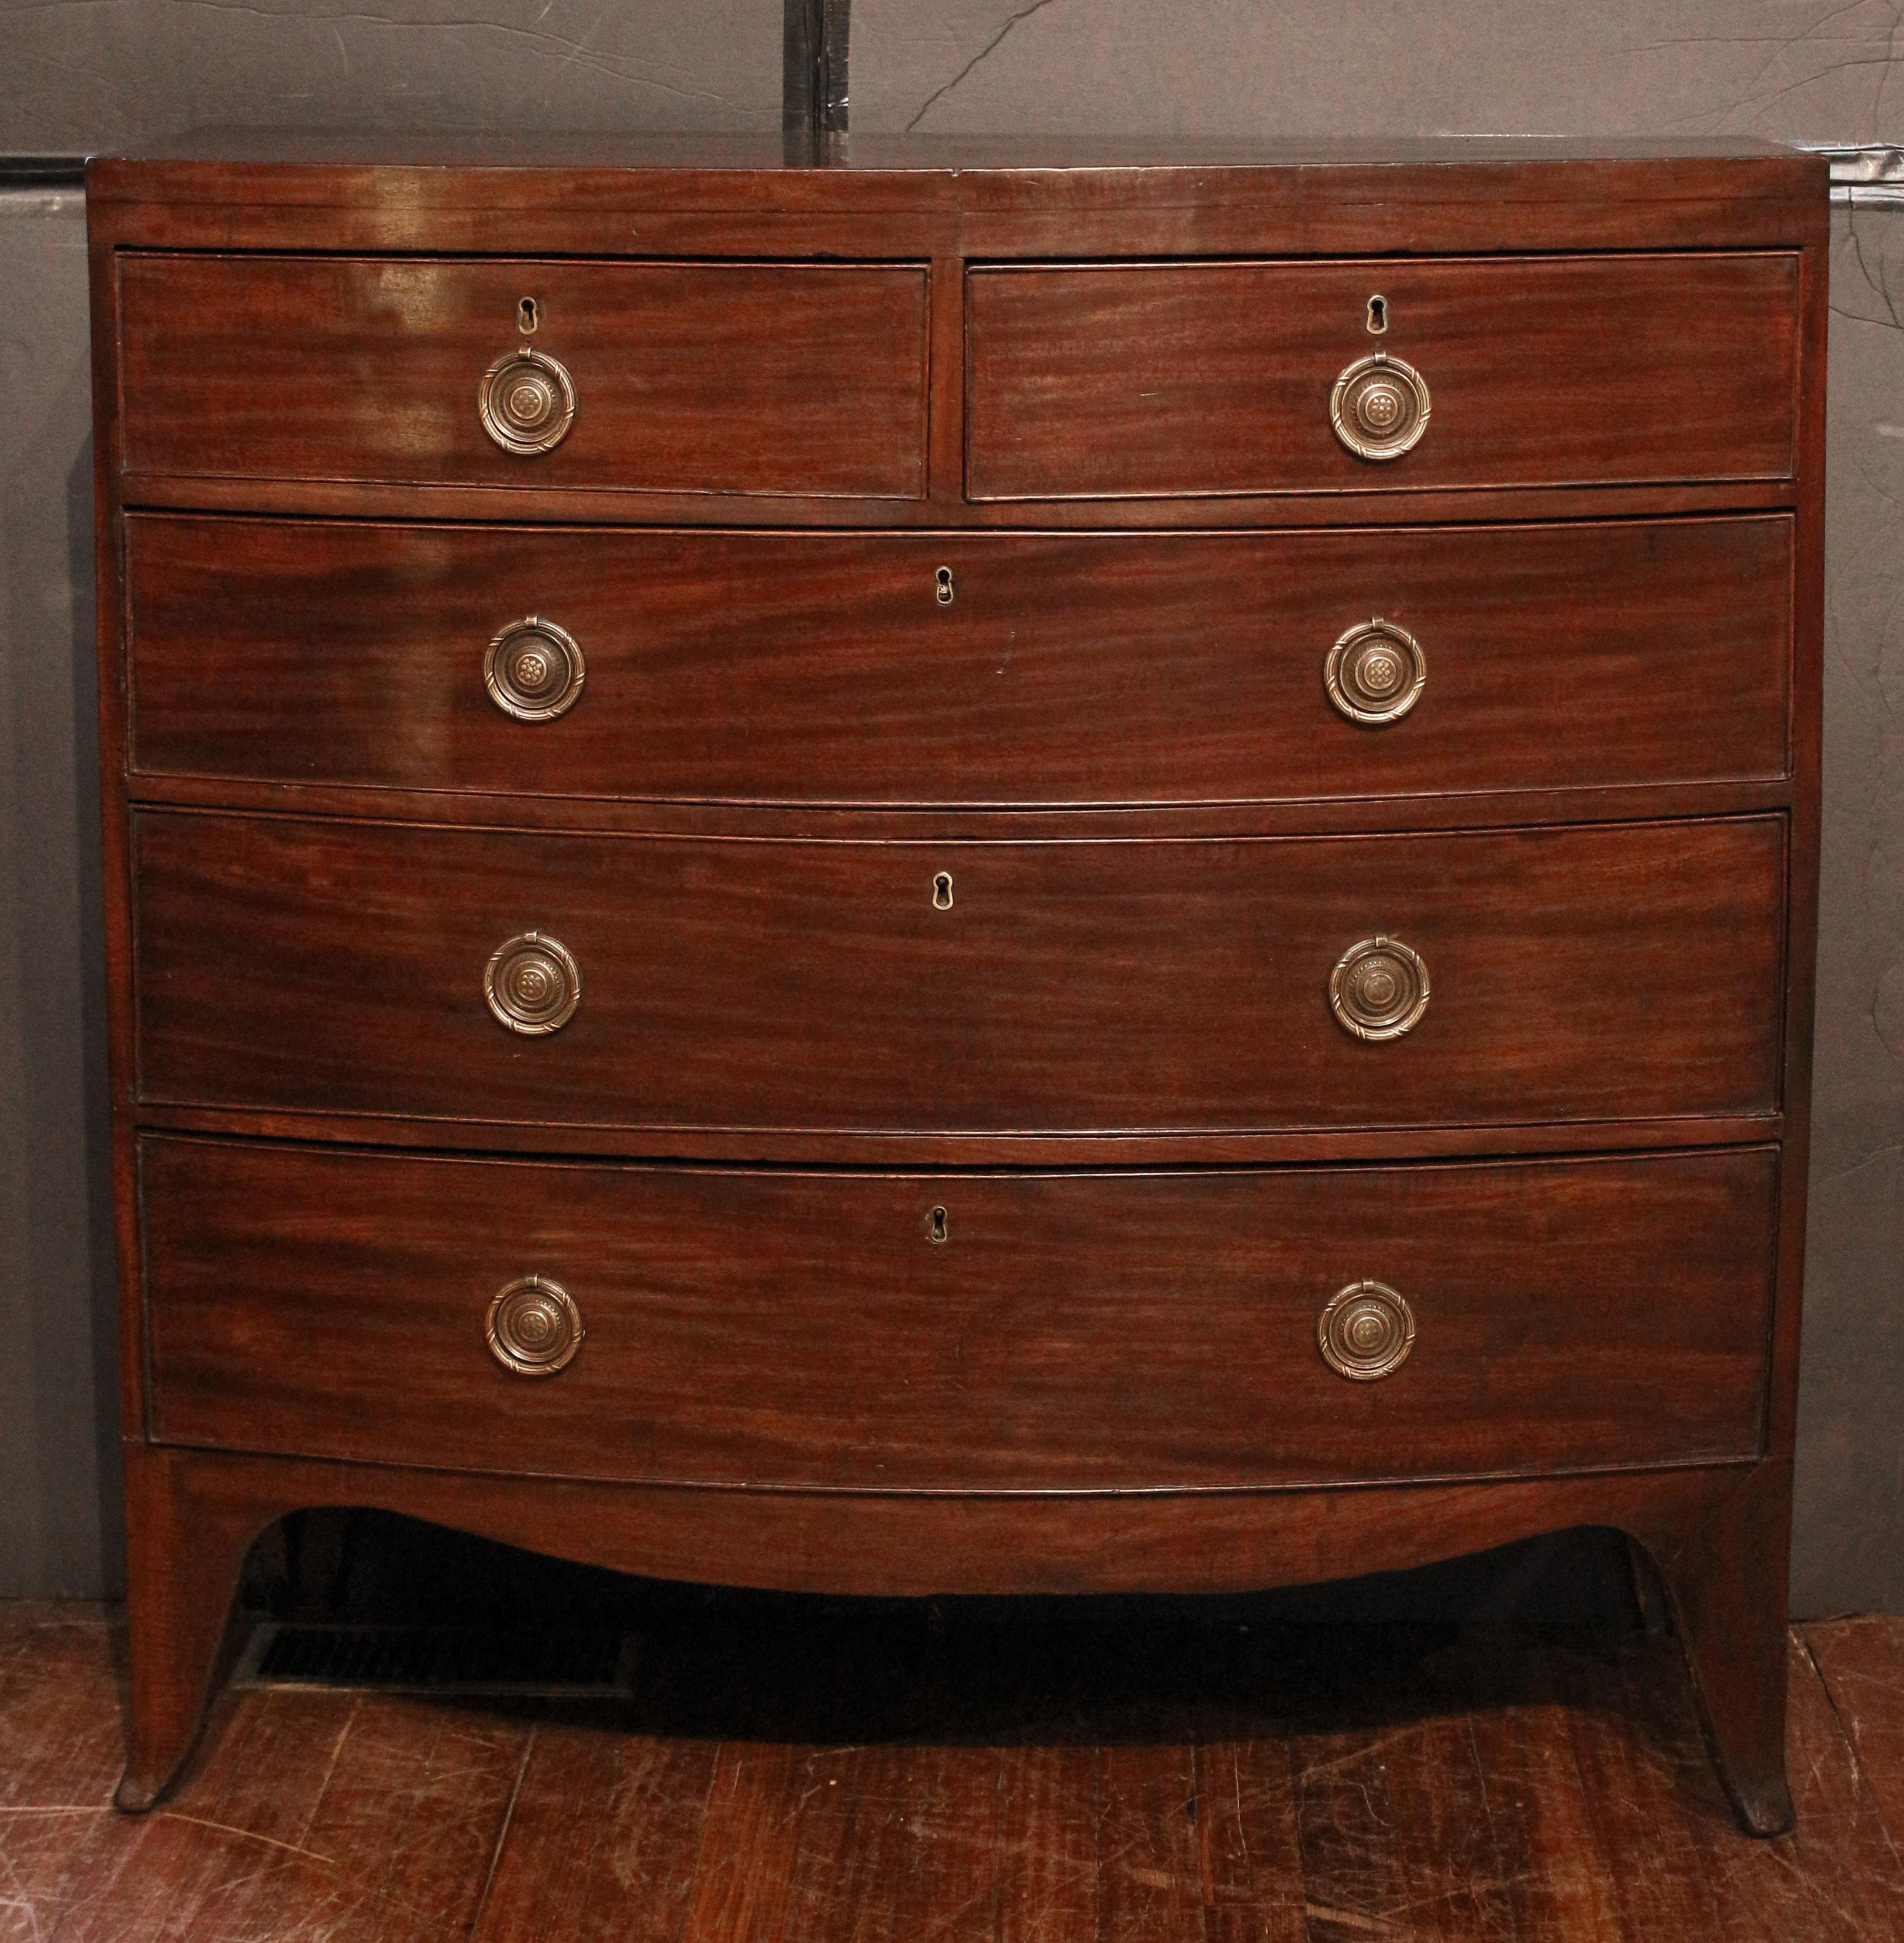 Early 19th century bowfront chest of drawers, English. Georgian period. Bowfront, 2 short over 3 long graduated drawers. Raised on French splay feet. Shaped aprons. Caddy top with ebony stringing along the front. Replaced period style high quality